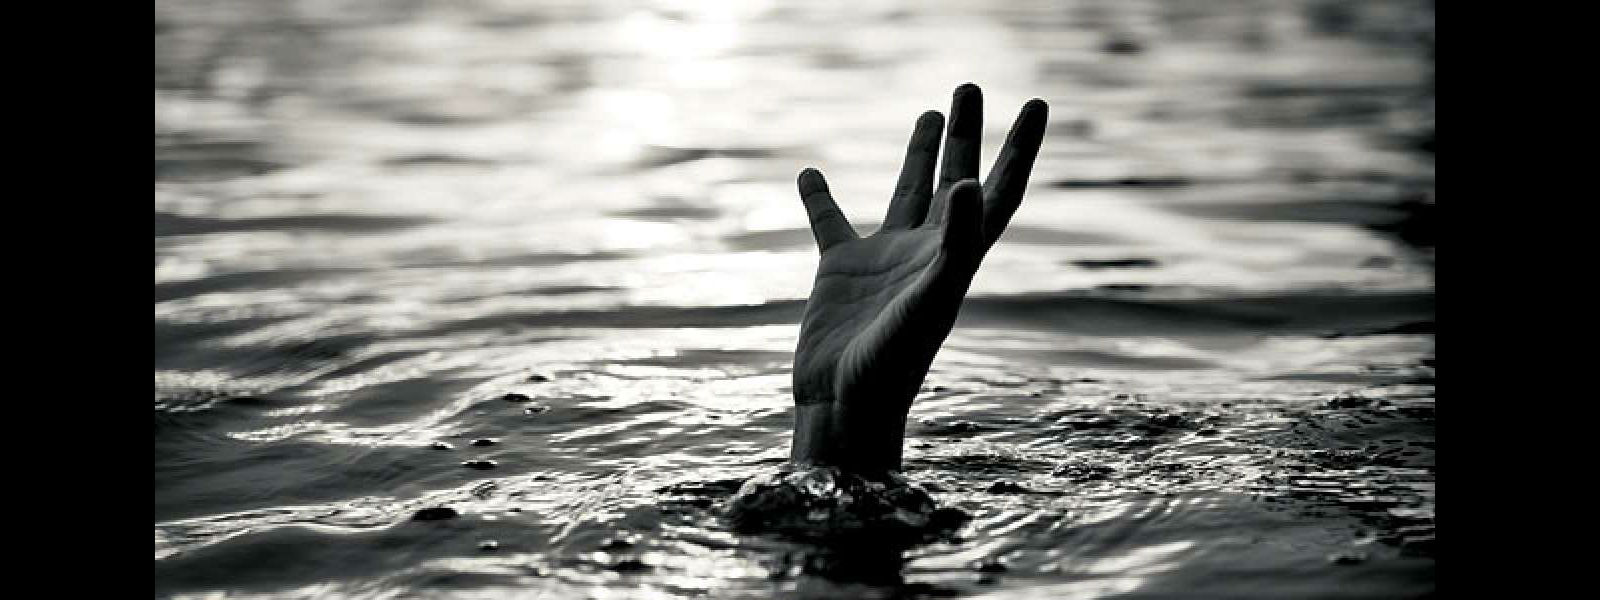 23-year-old youth drowns to death